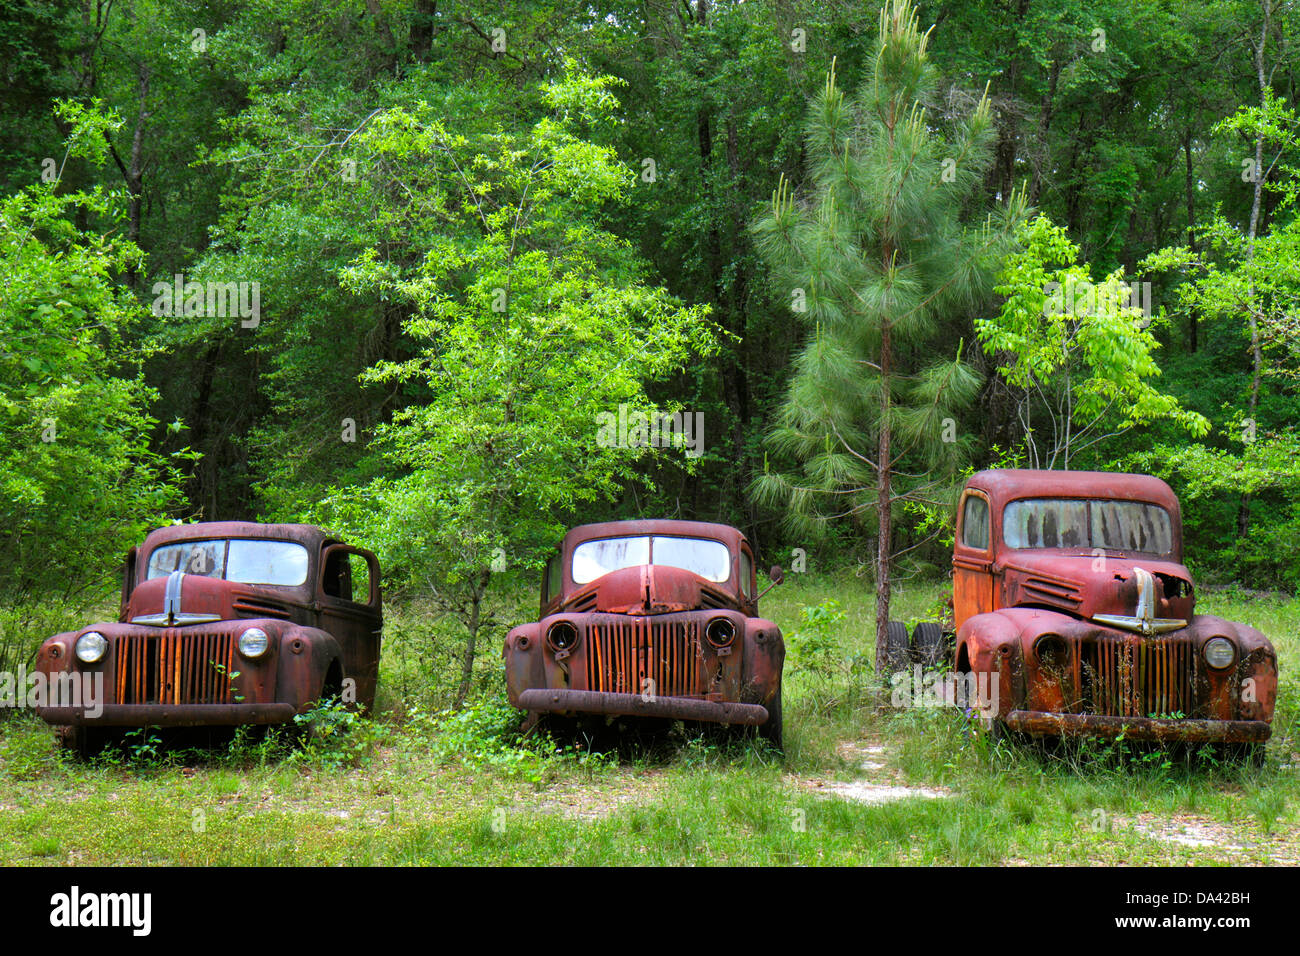 Crawfordville Florida,rusted rusty rusting junked abandoned antique car cars automobile automobiles truck trucks vehicle vehicles Stock Photo